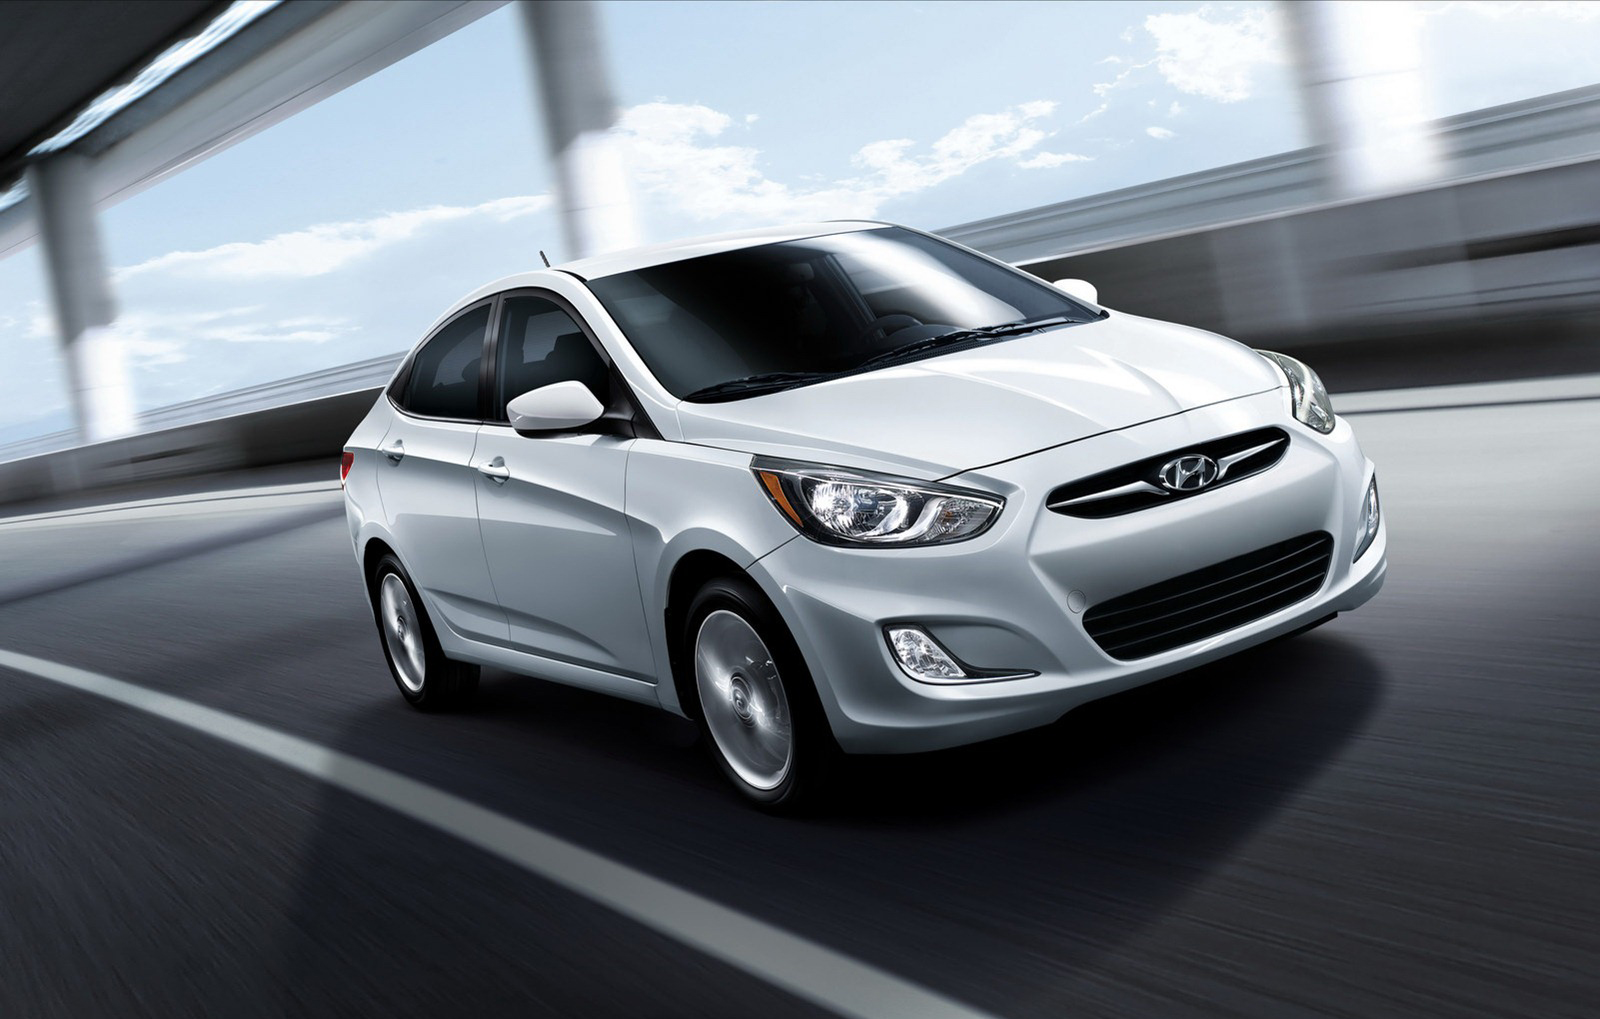 Hyundai Accent 2013 - ReViEw 4 CArS AnD TrUcKs